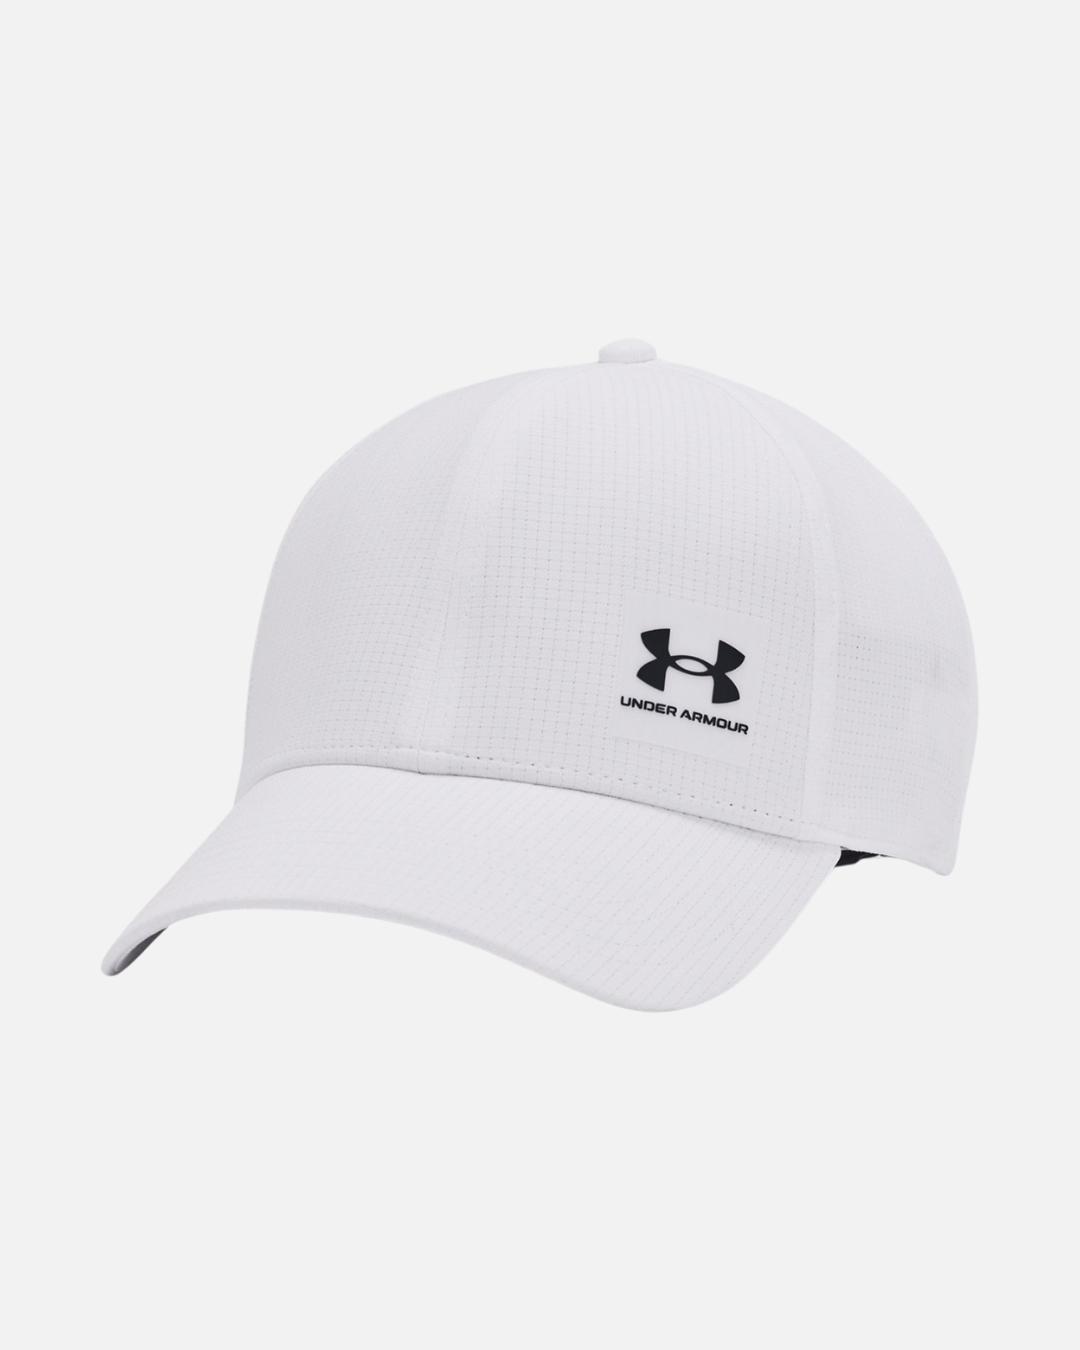 Under Armor Iso-Chill Armourvent Cap - White